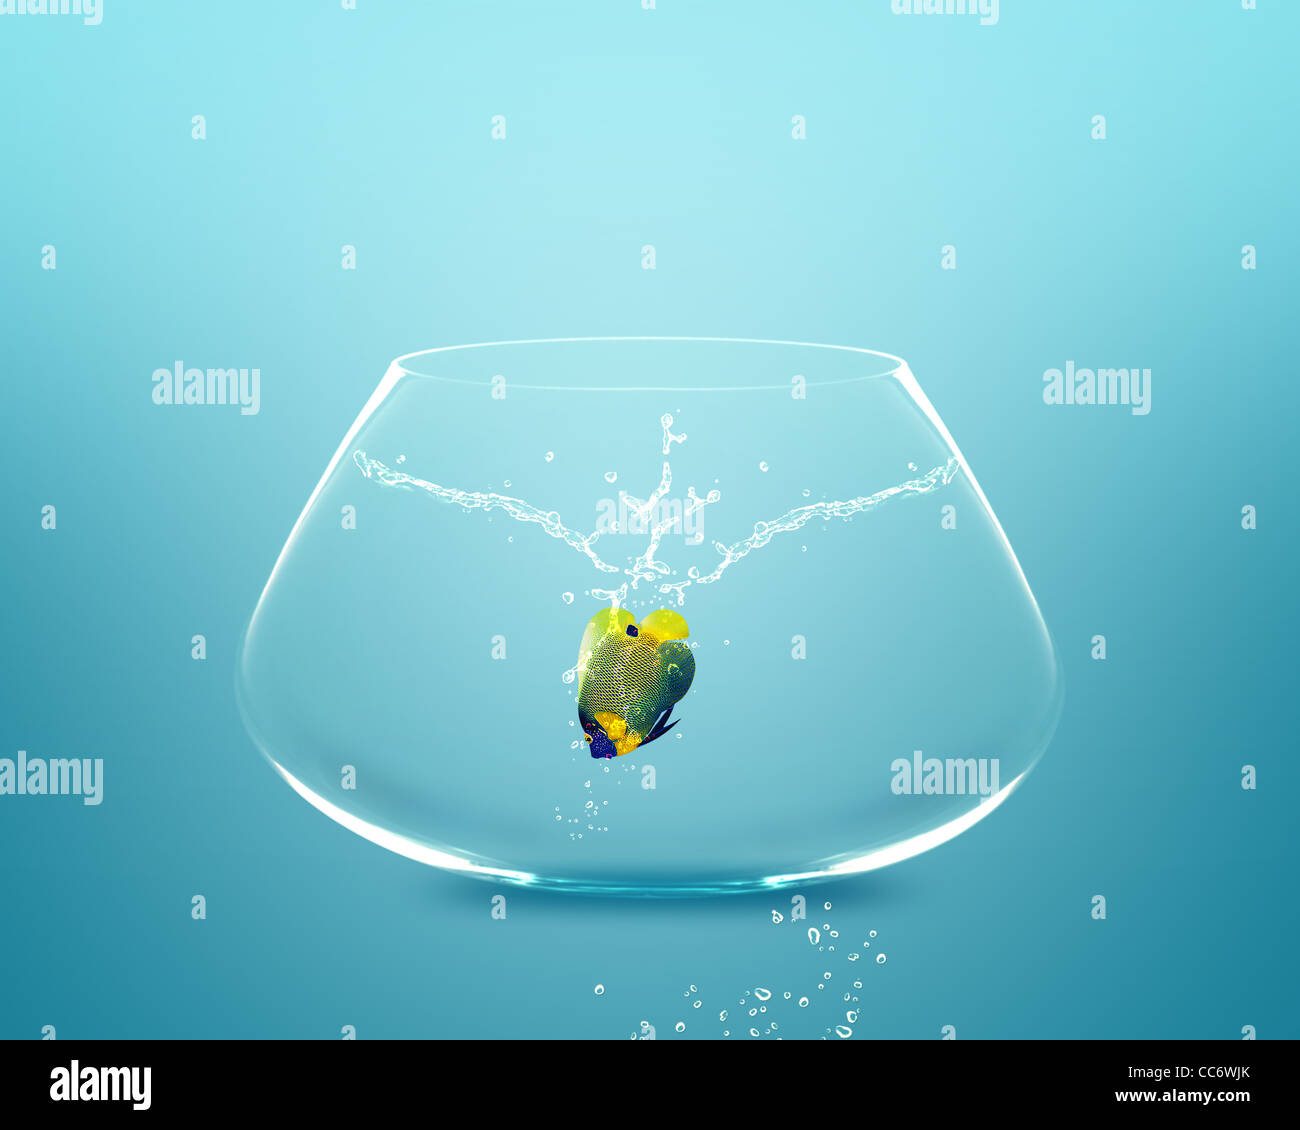 Anglefish jumping to Big bowl, Good Concept for new life, Big Opprtunity, Ambition and challenge concept. Stock Photo